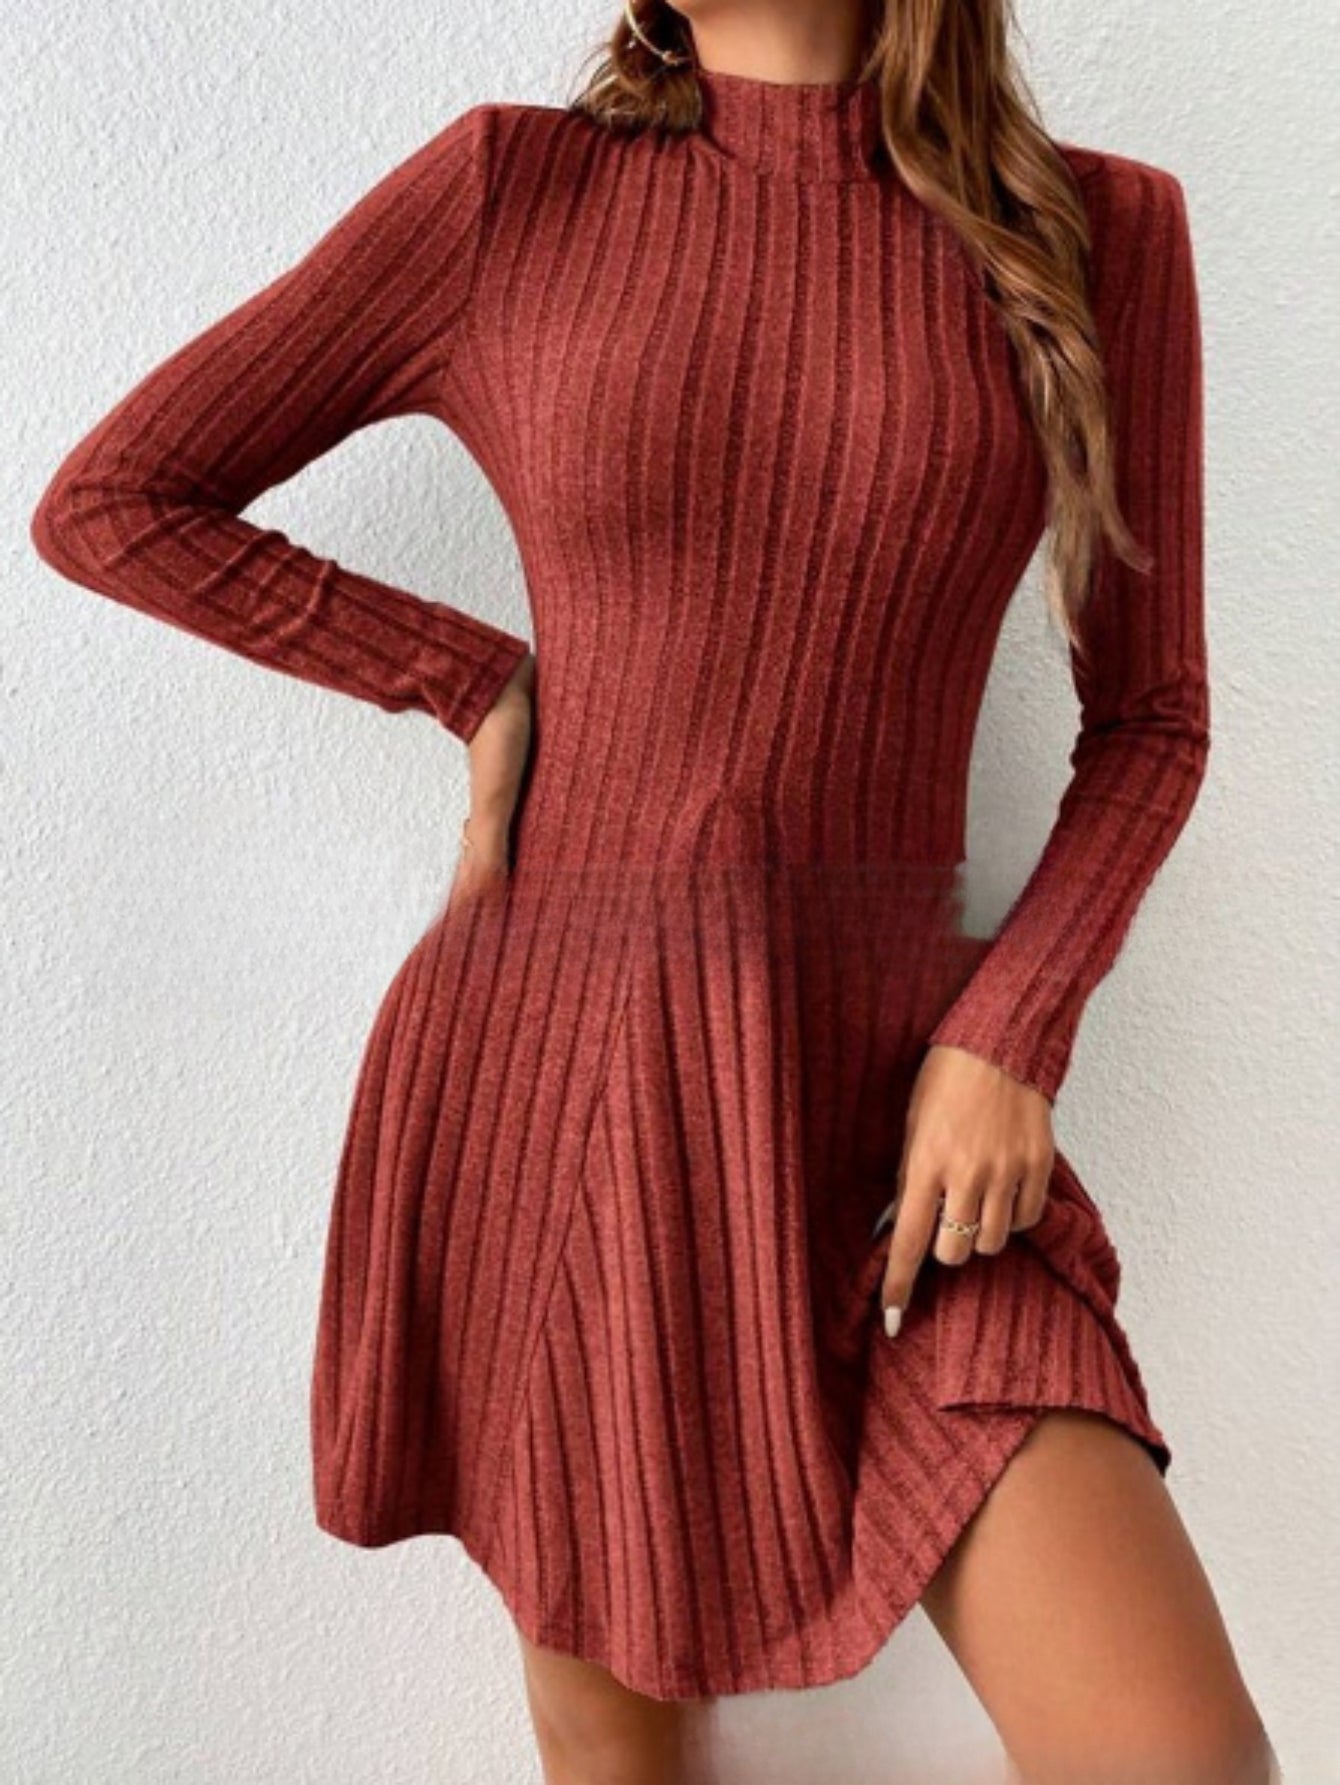 Ribbed Knit Long Sleeve Dress, Casual Crew Neck Knit A-line Dress